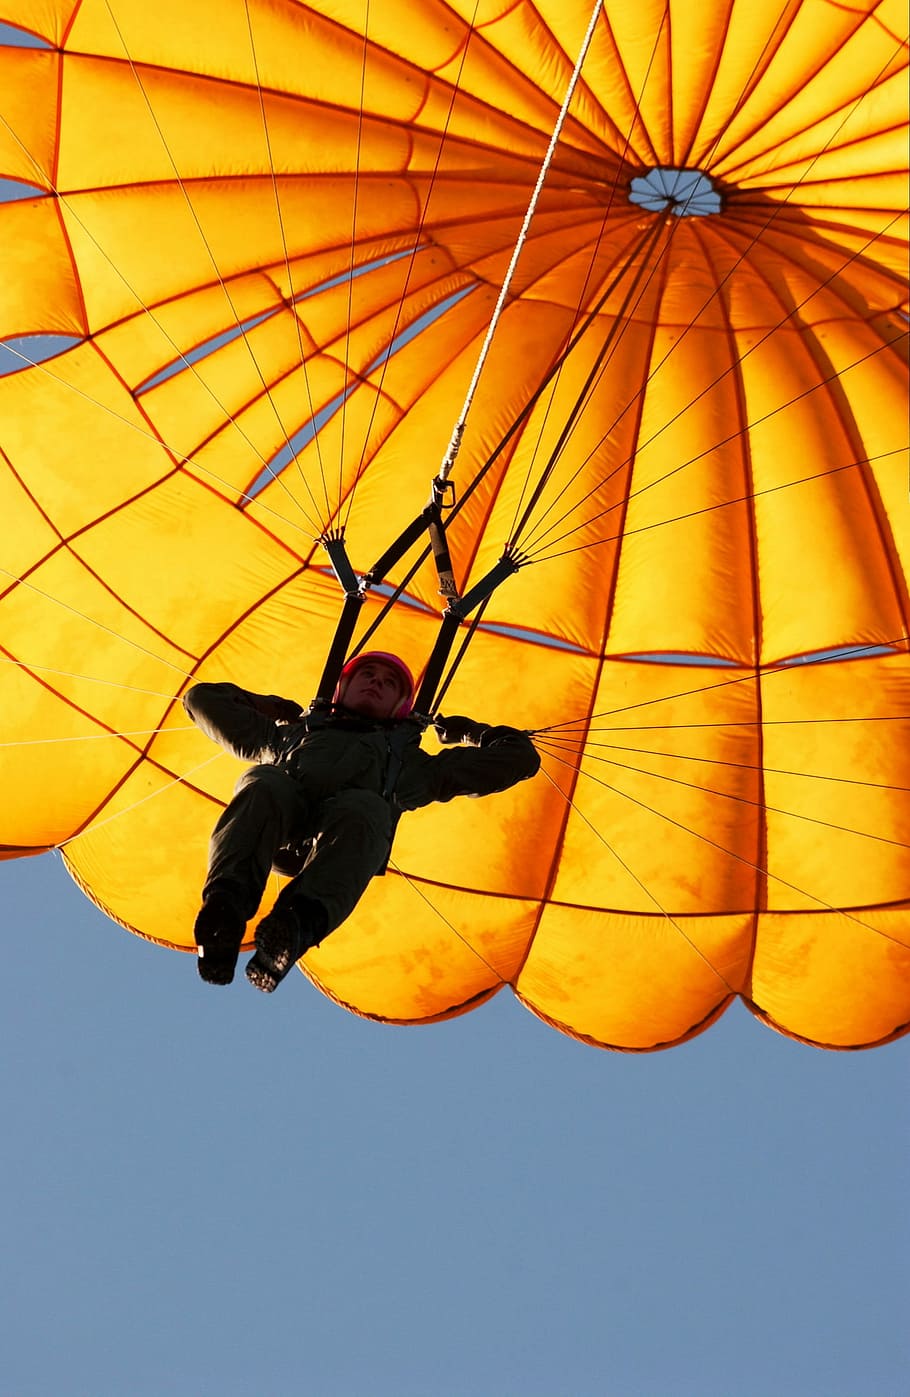 Parasailing, Parachute, Fly, Tether, sky, tow, dom, canopy, harness, equipment